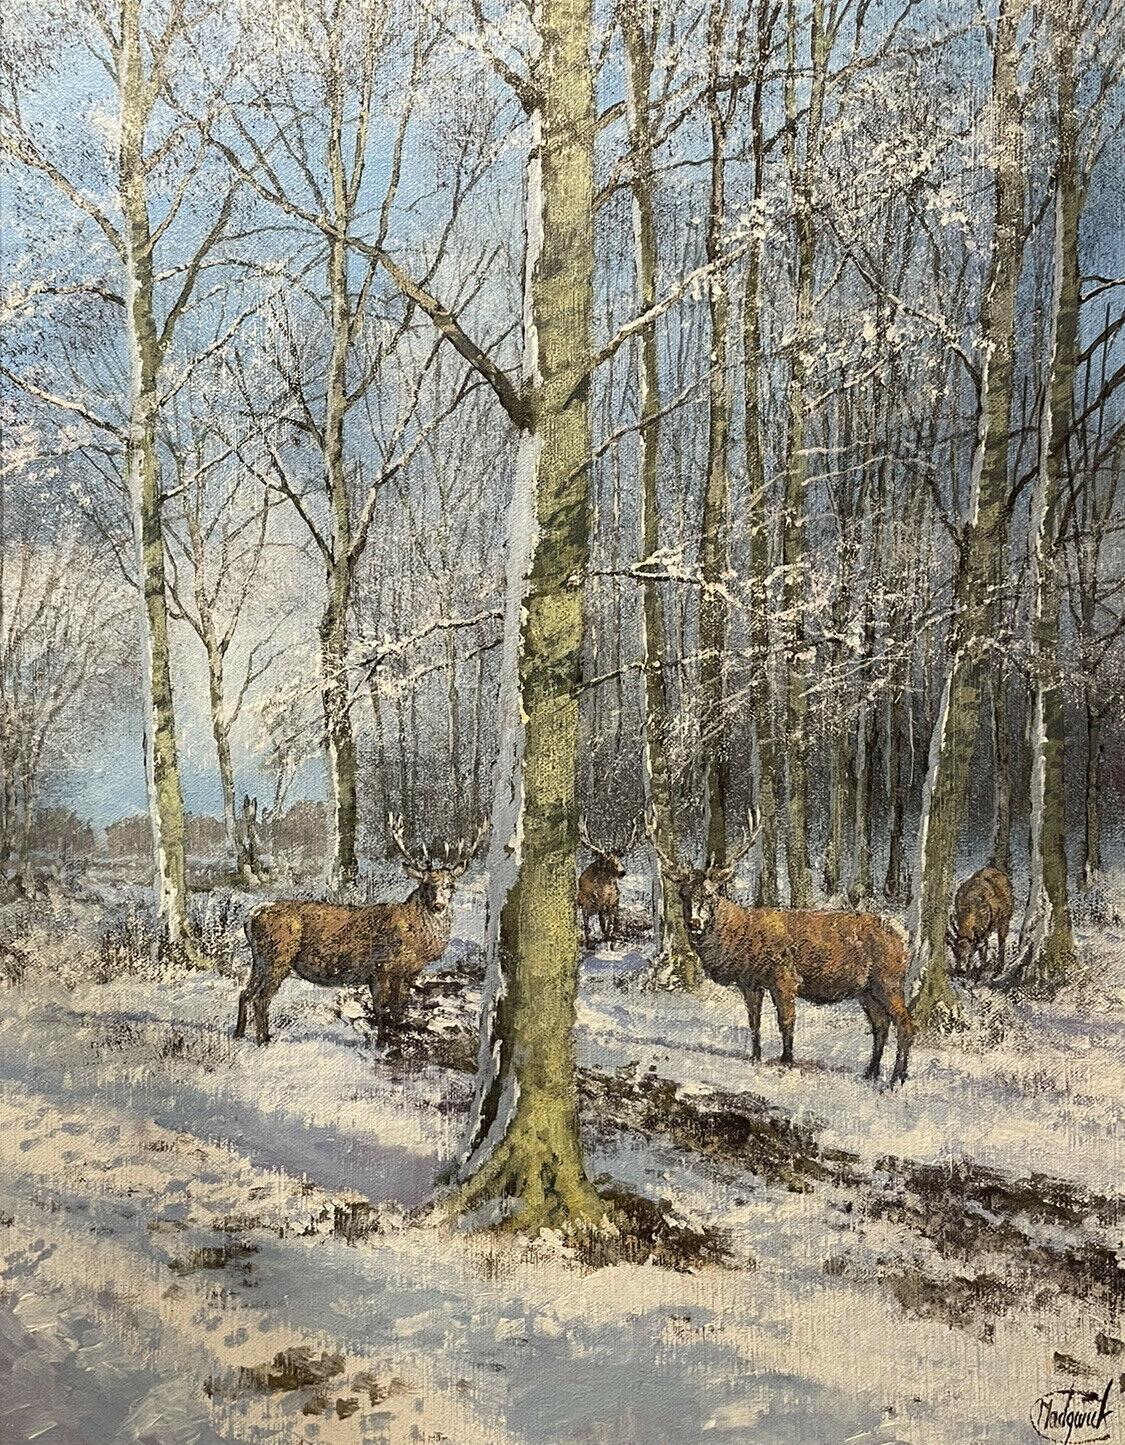 CLIVE MADGWICK (1934-2005) SIGNED OIL - STAGS IN WINTER WOODLAND LANDSCAPE - Painting by Clive Madgwick